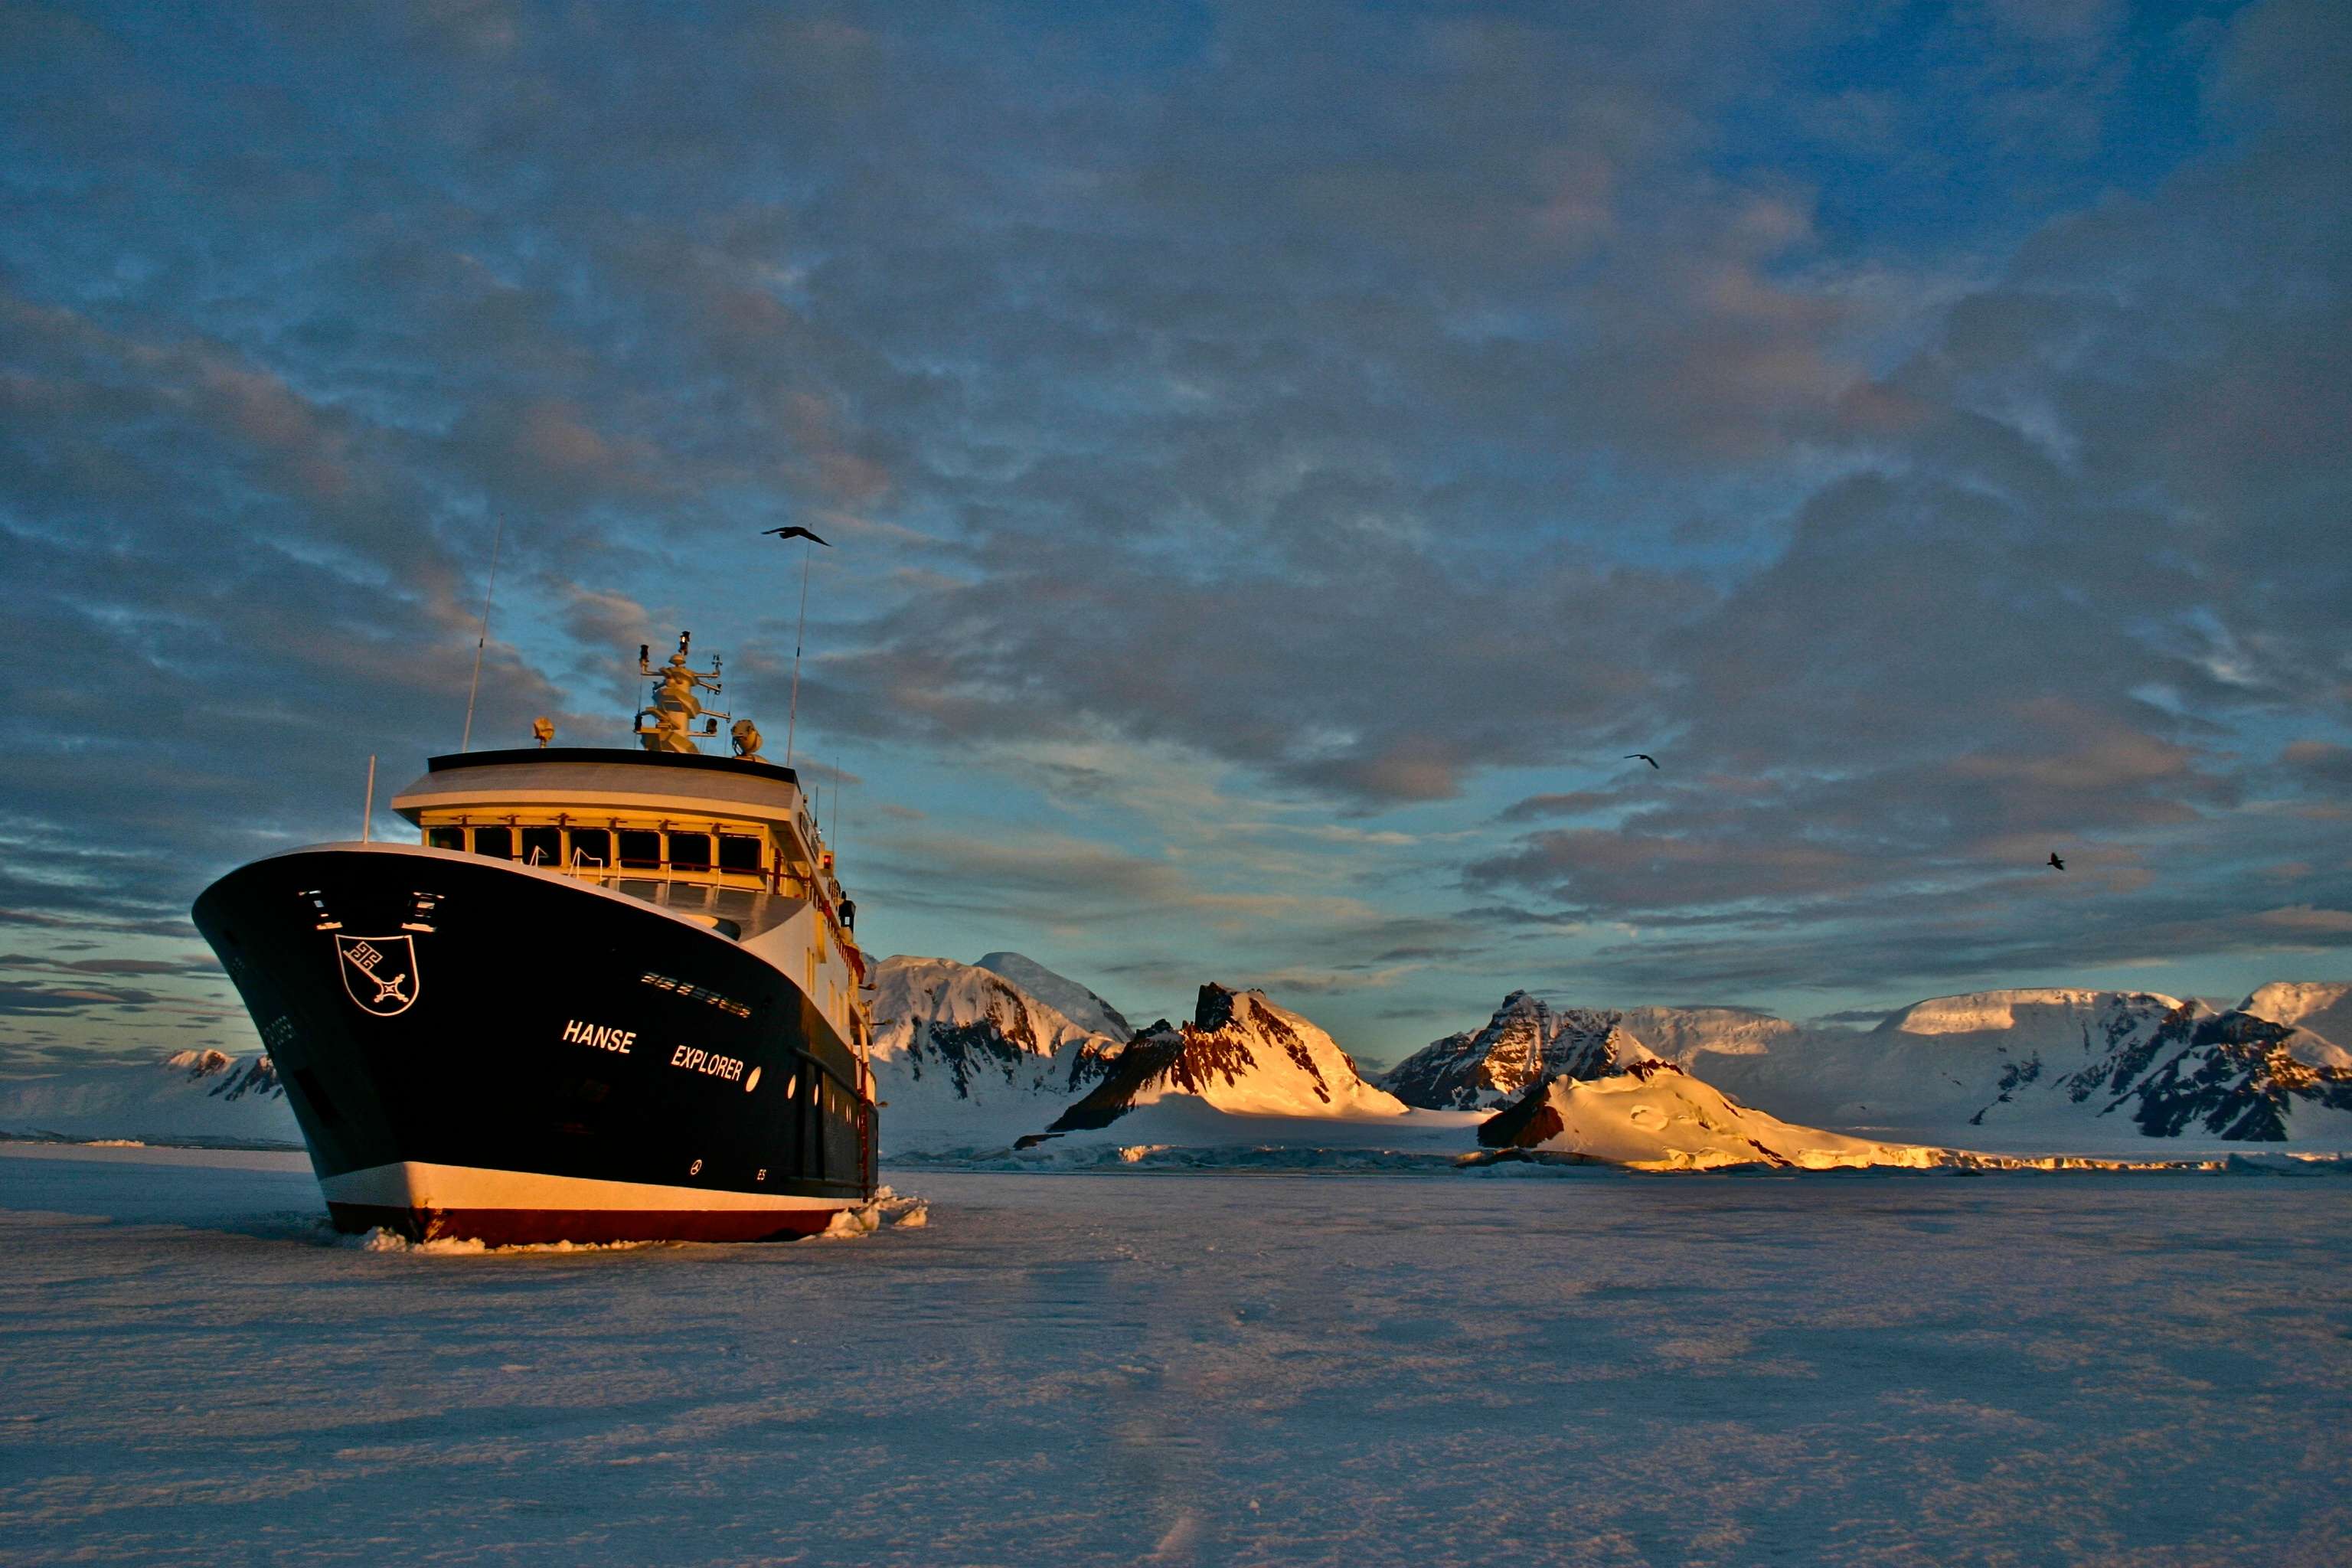 Expedition yact 'Hanse Explorer' docks in the ice in the Antarctic